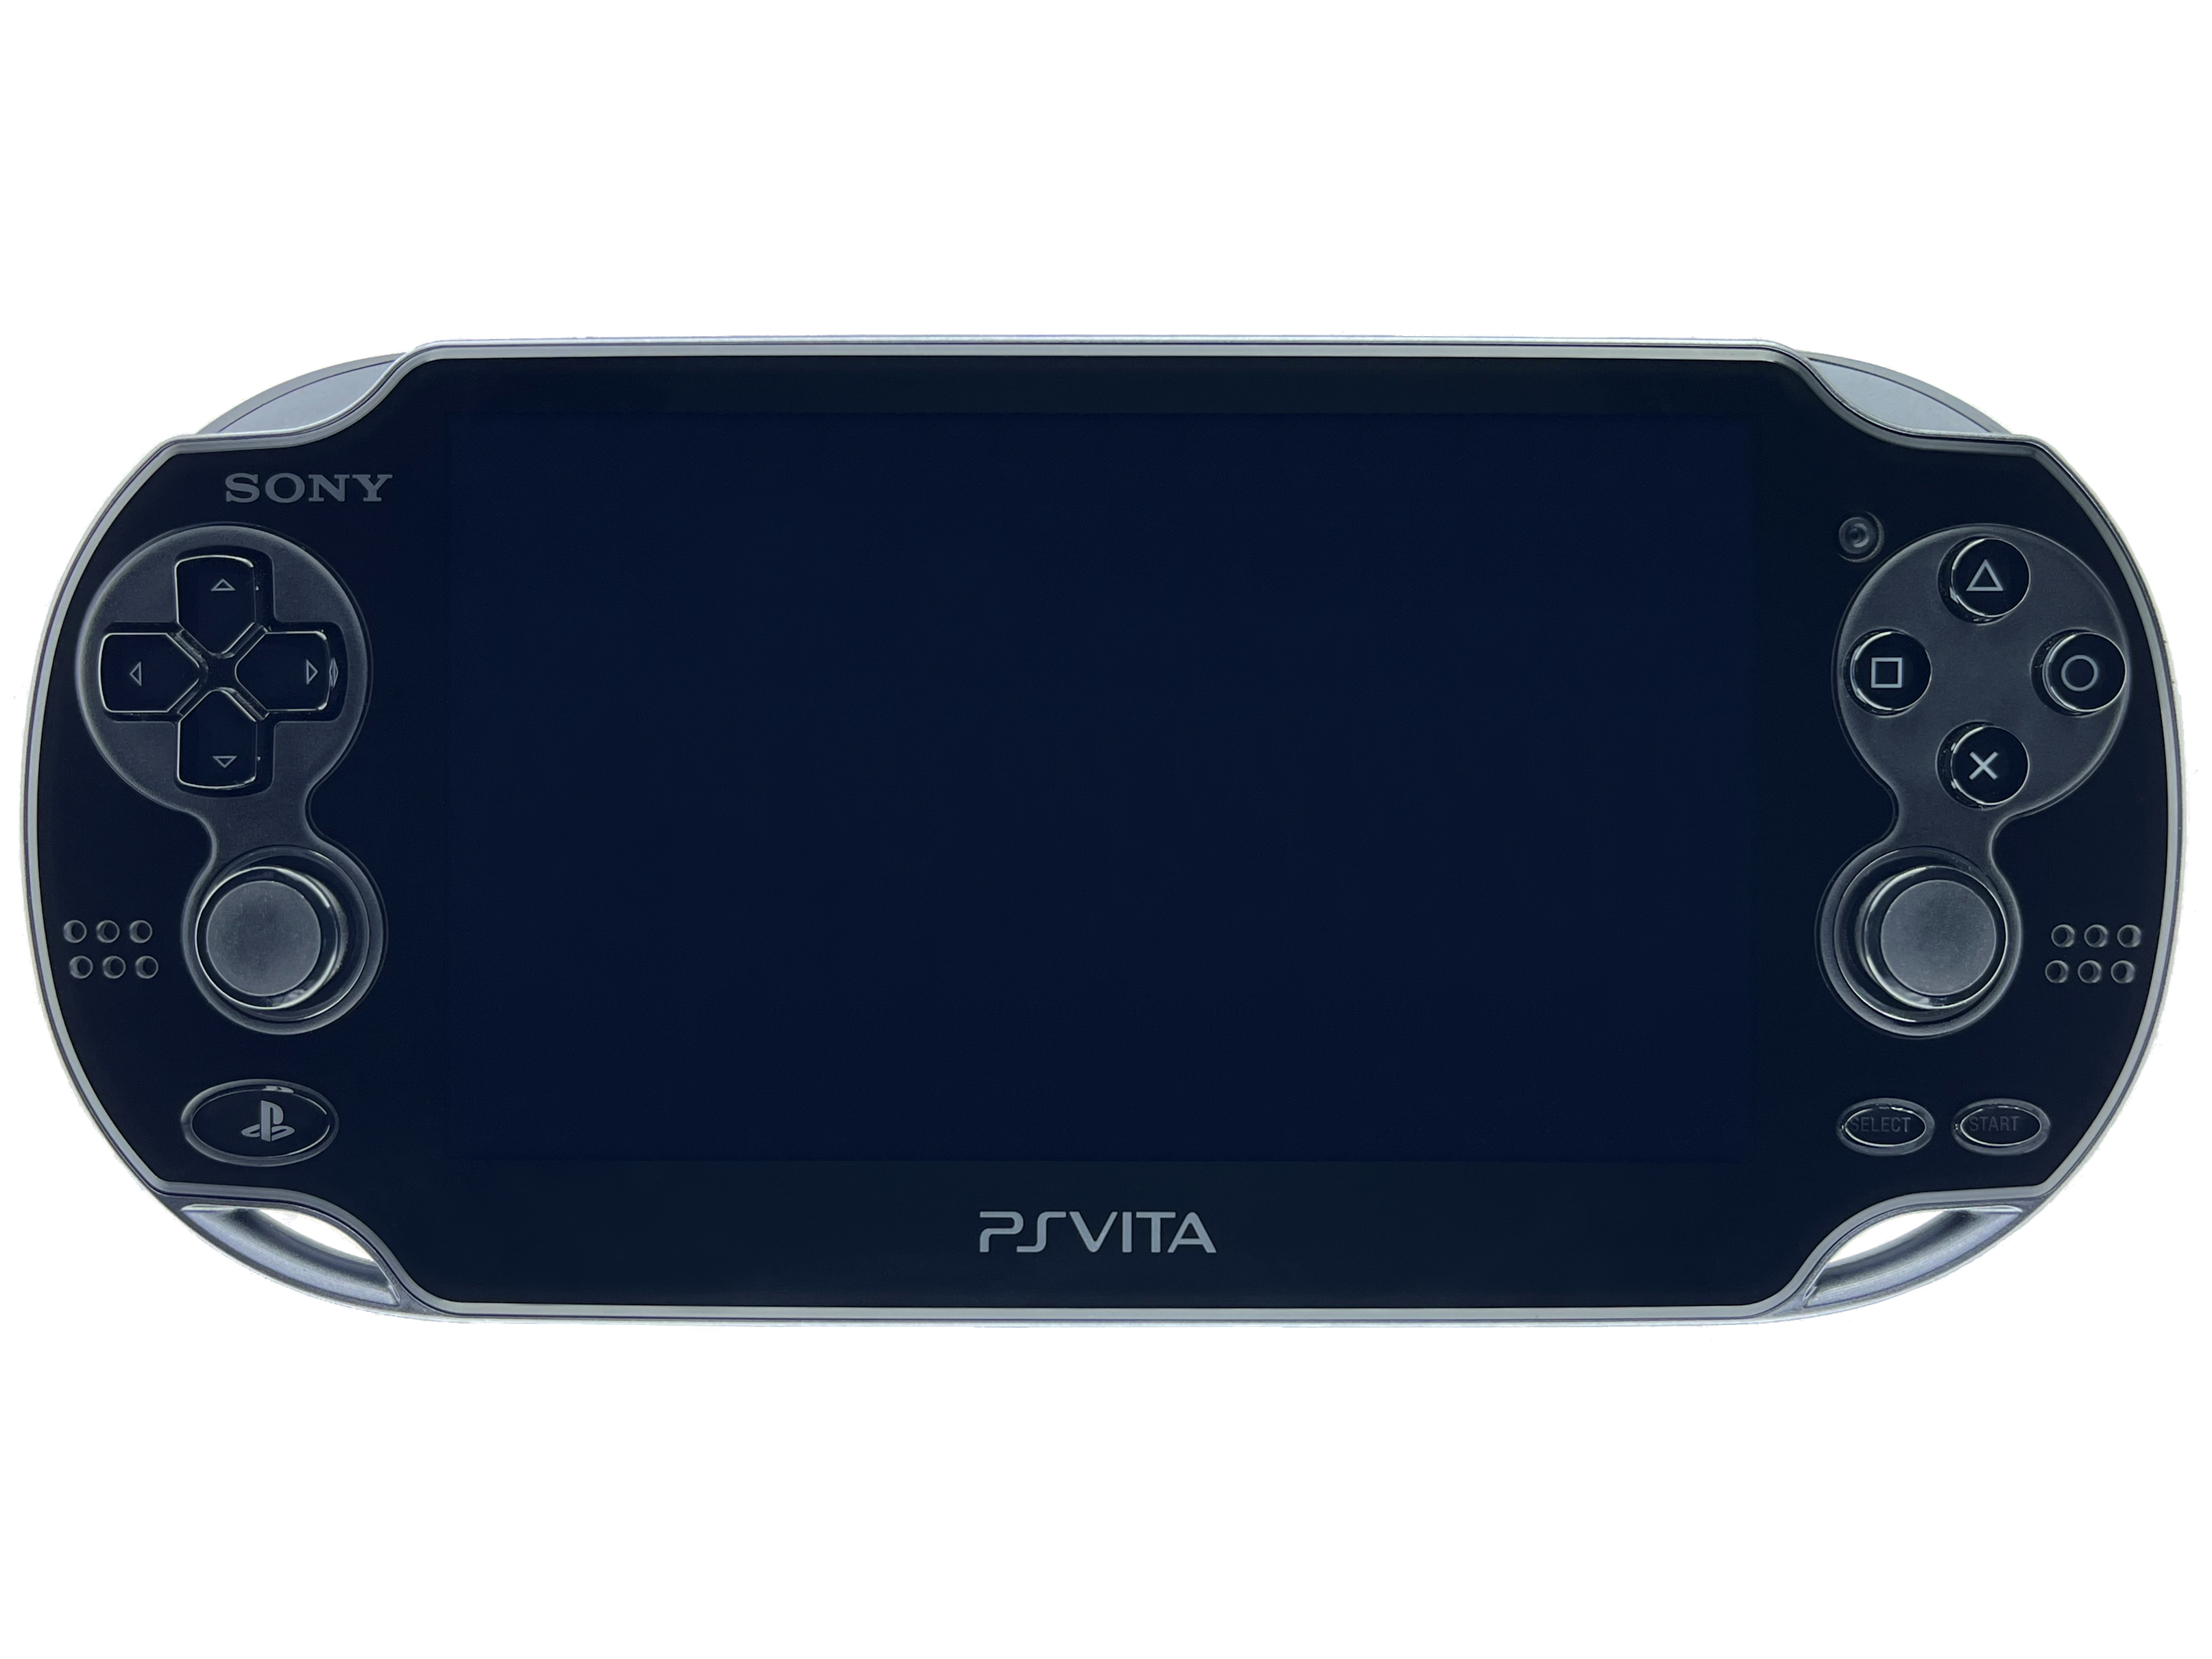 Sony PS Vita CEM-3000VD1 Prototype Console - Consolevariations